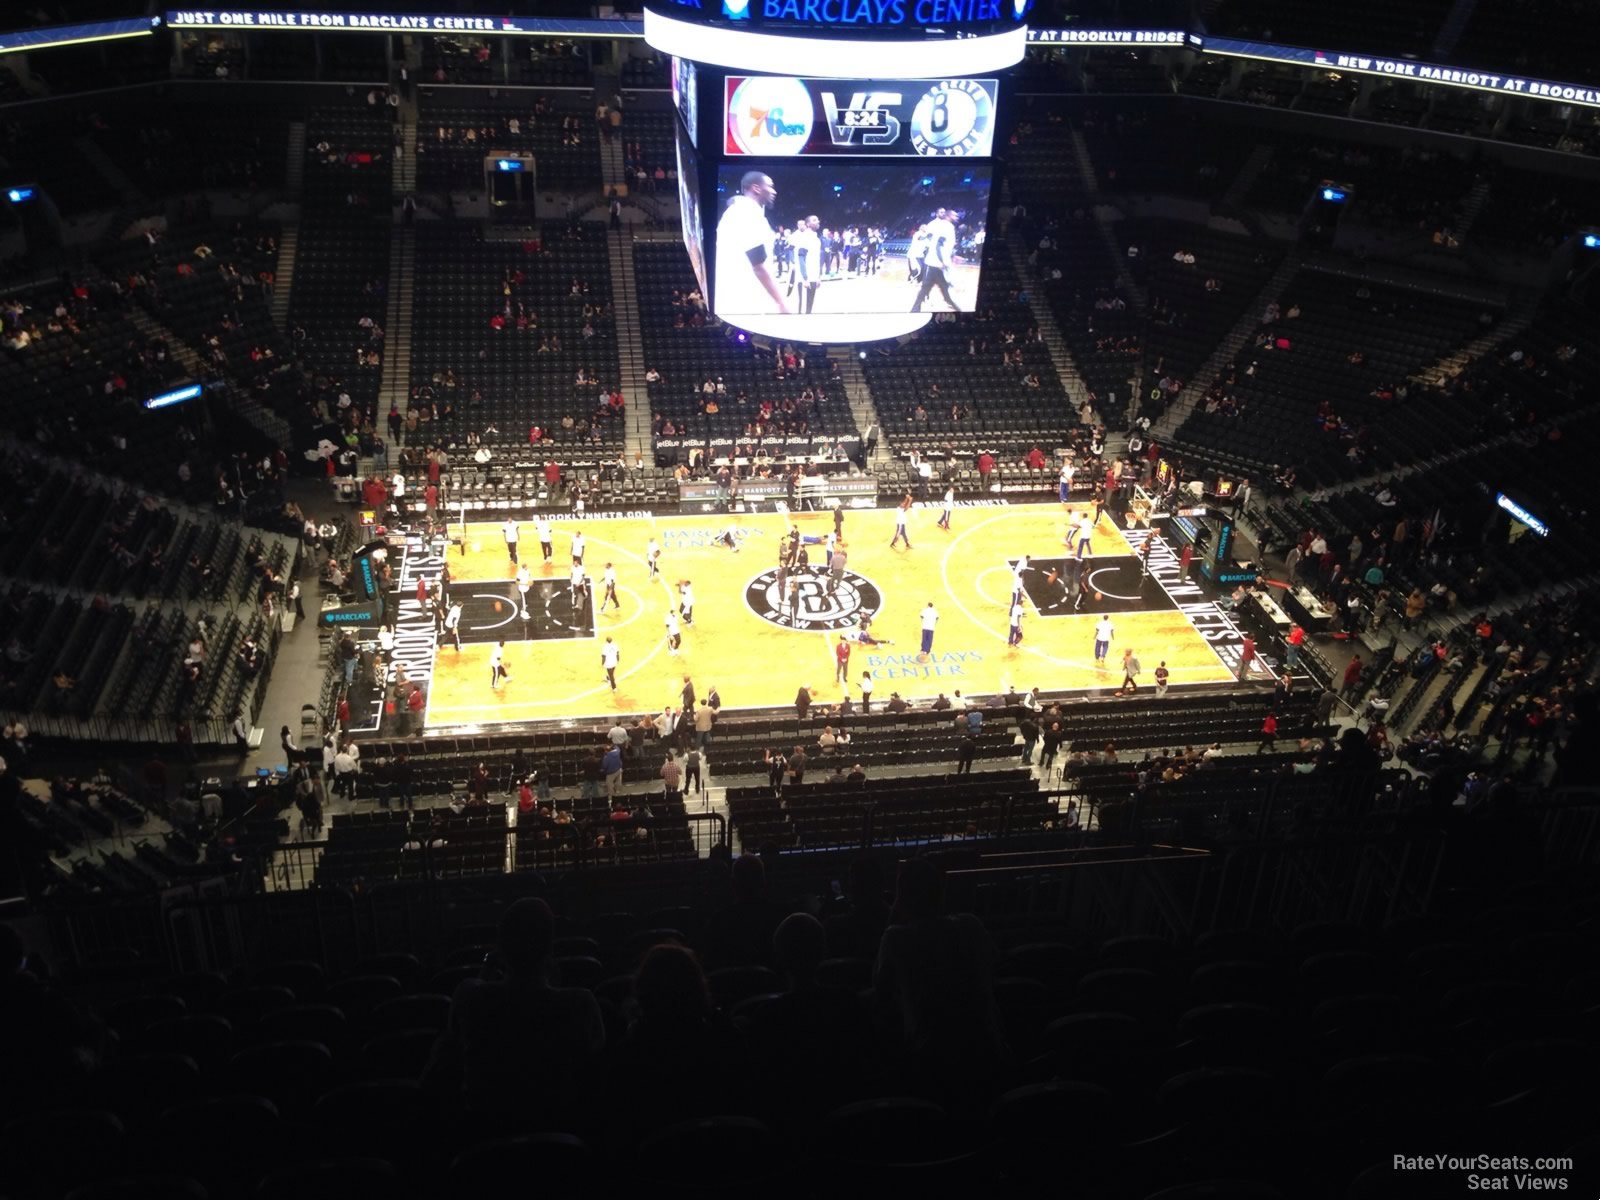 section 225, row 14 seat view  for basketball - barclays center